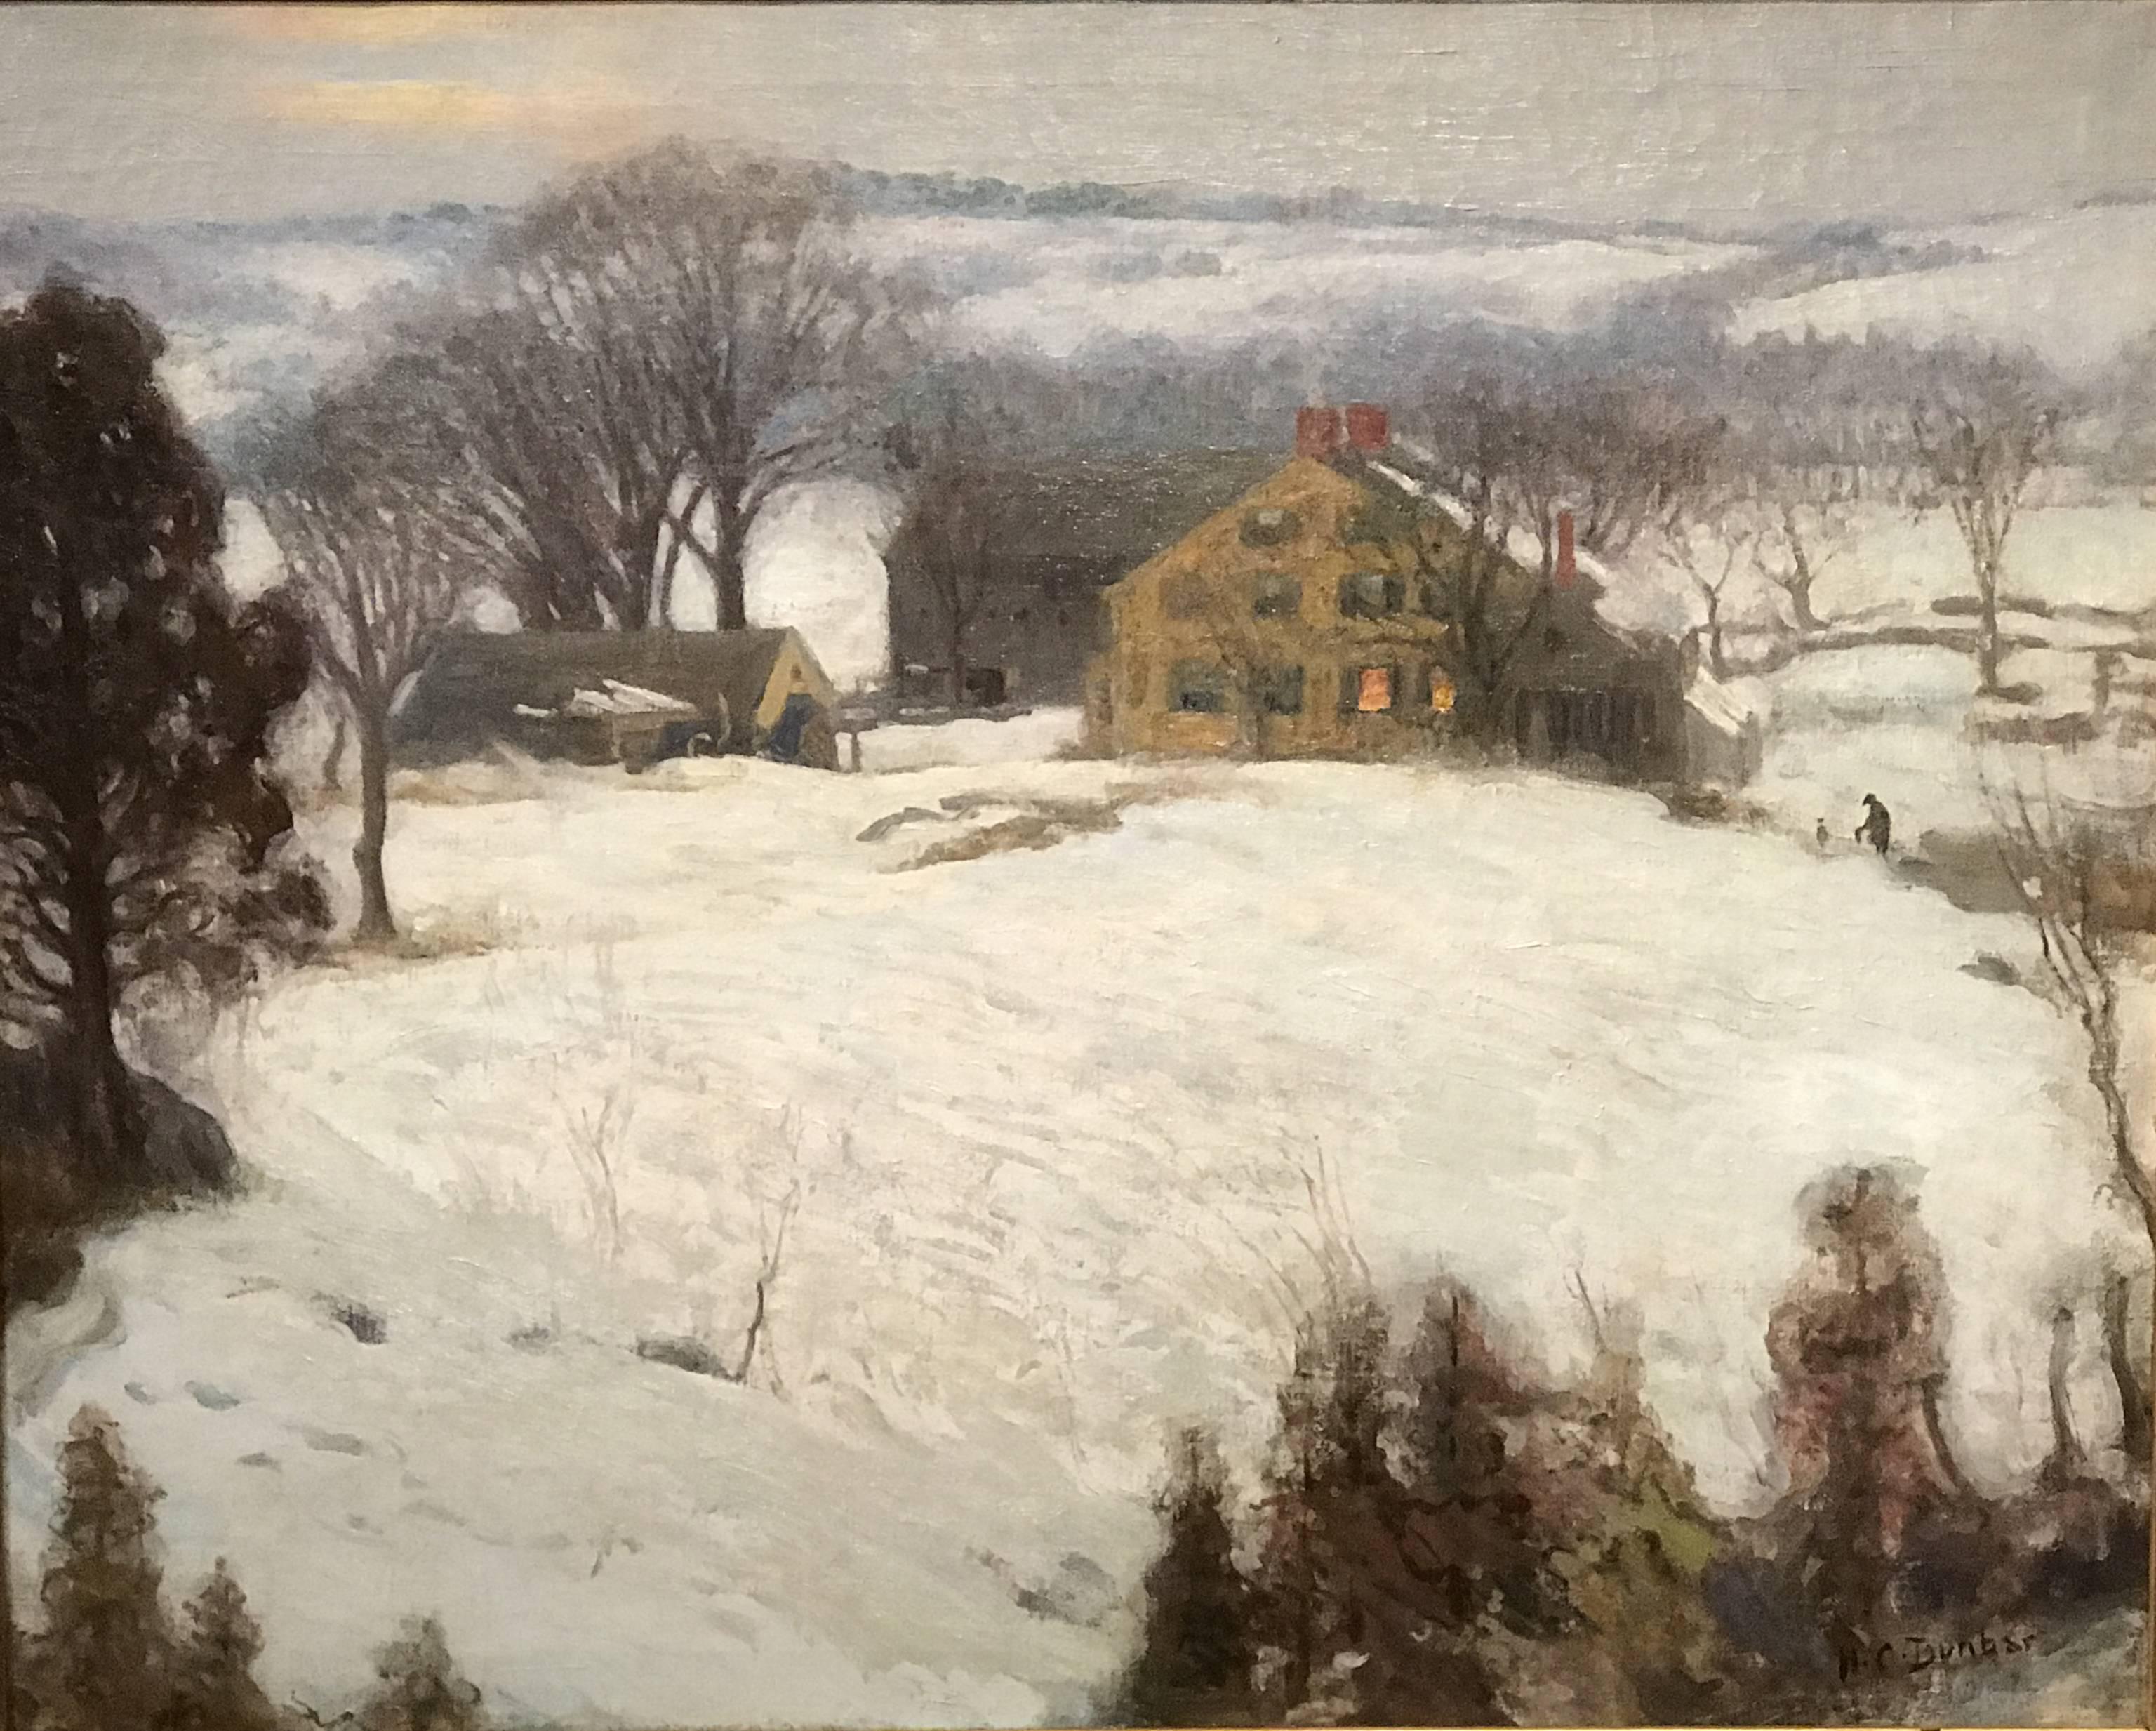 A fine winter landscape with figures done by American artist Harold C. Dunbar (1882-1953). Dunbar was born in Brockton, MA on December 8, 1882. He resided in Chatham, MA and died in 1953. His work includes portraits, landscapes, street scenes, still